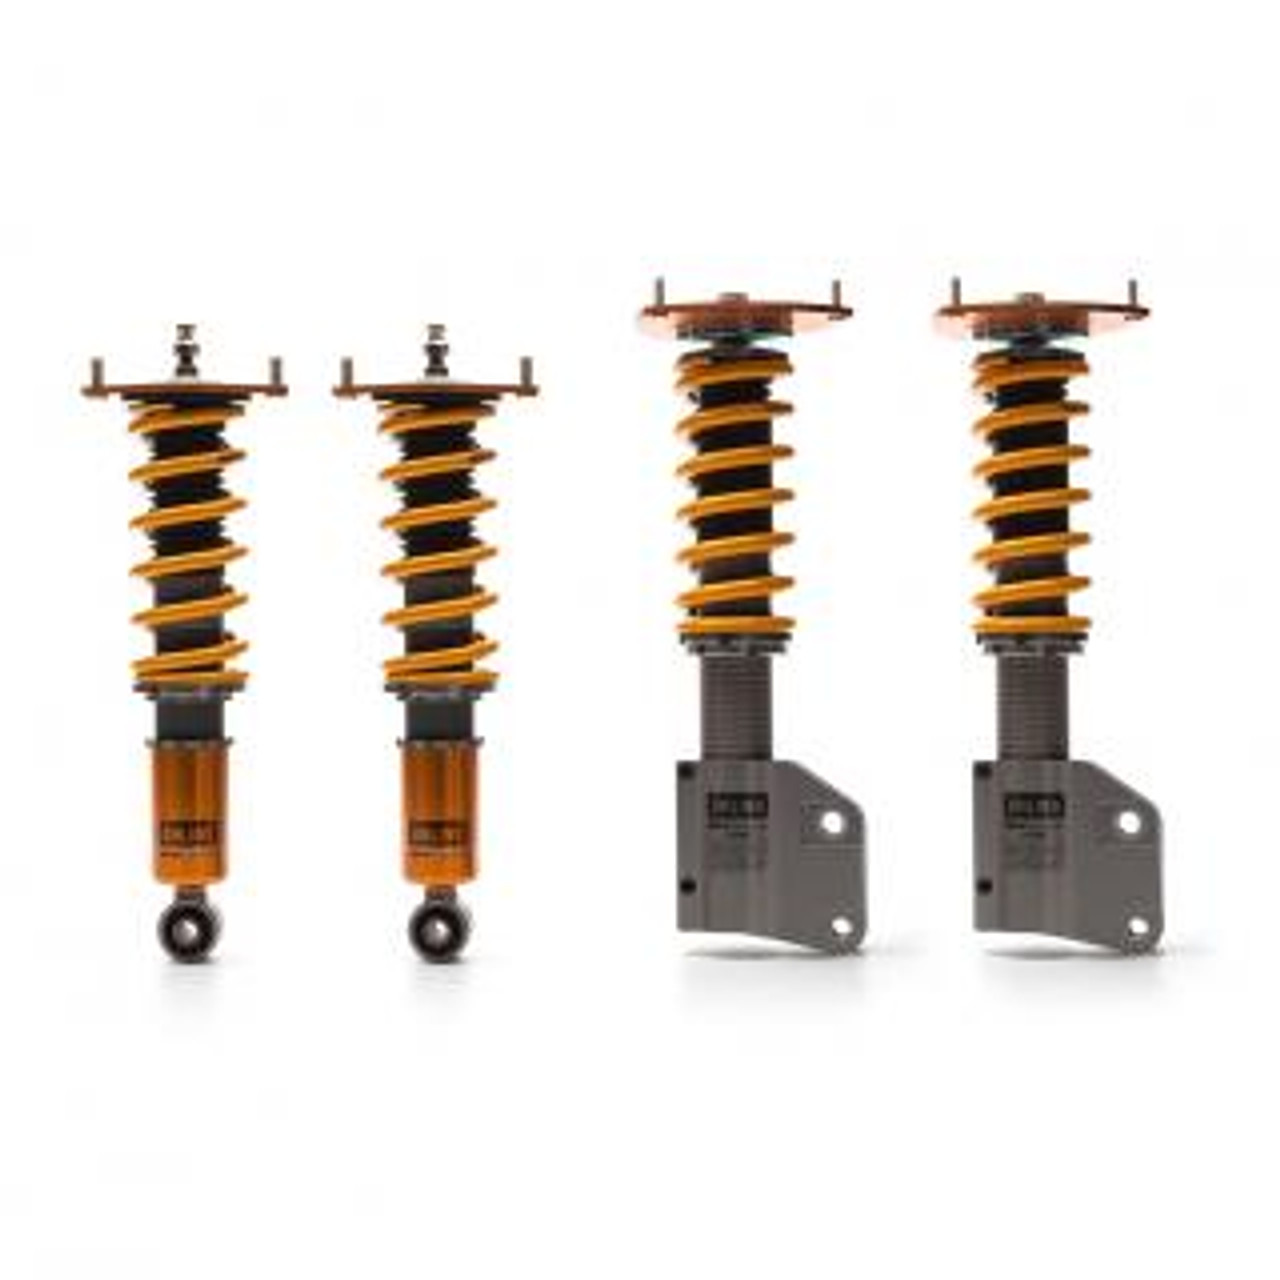 SUBARU TRACK RAT SUSPENSION PACKAGE - OHLINS ROAD AND TRACK COILOVERS